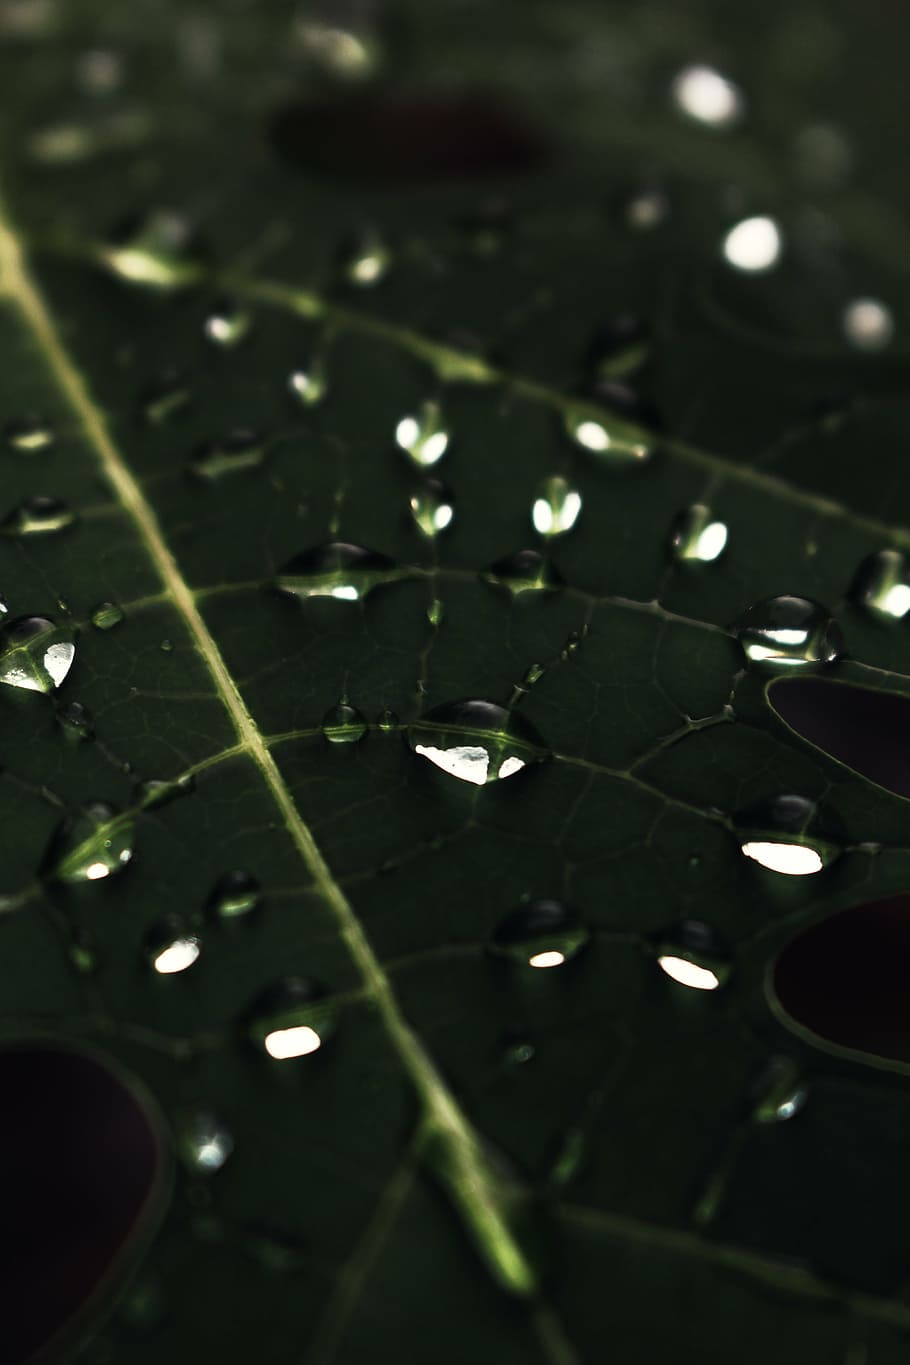 micro, photography, water dew, green, leaf, plant, nature, plants, leaves, veins